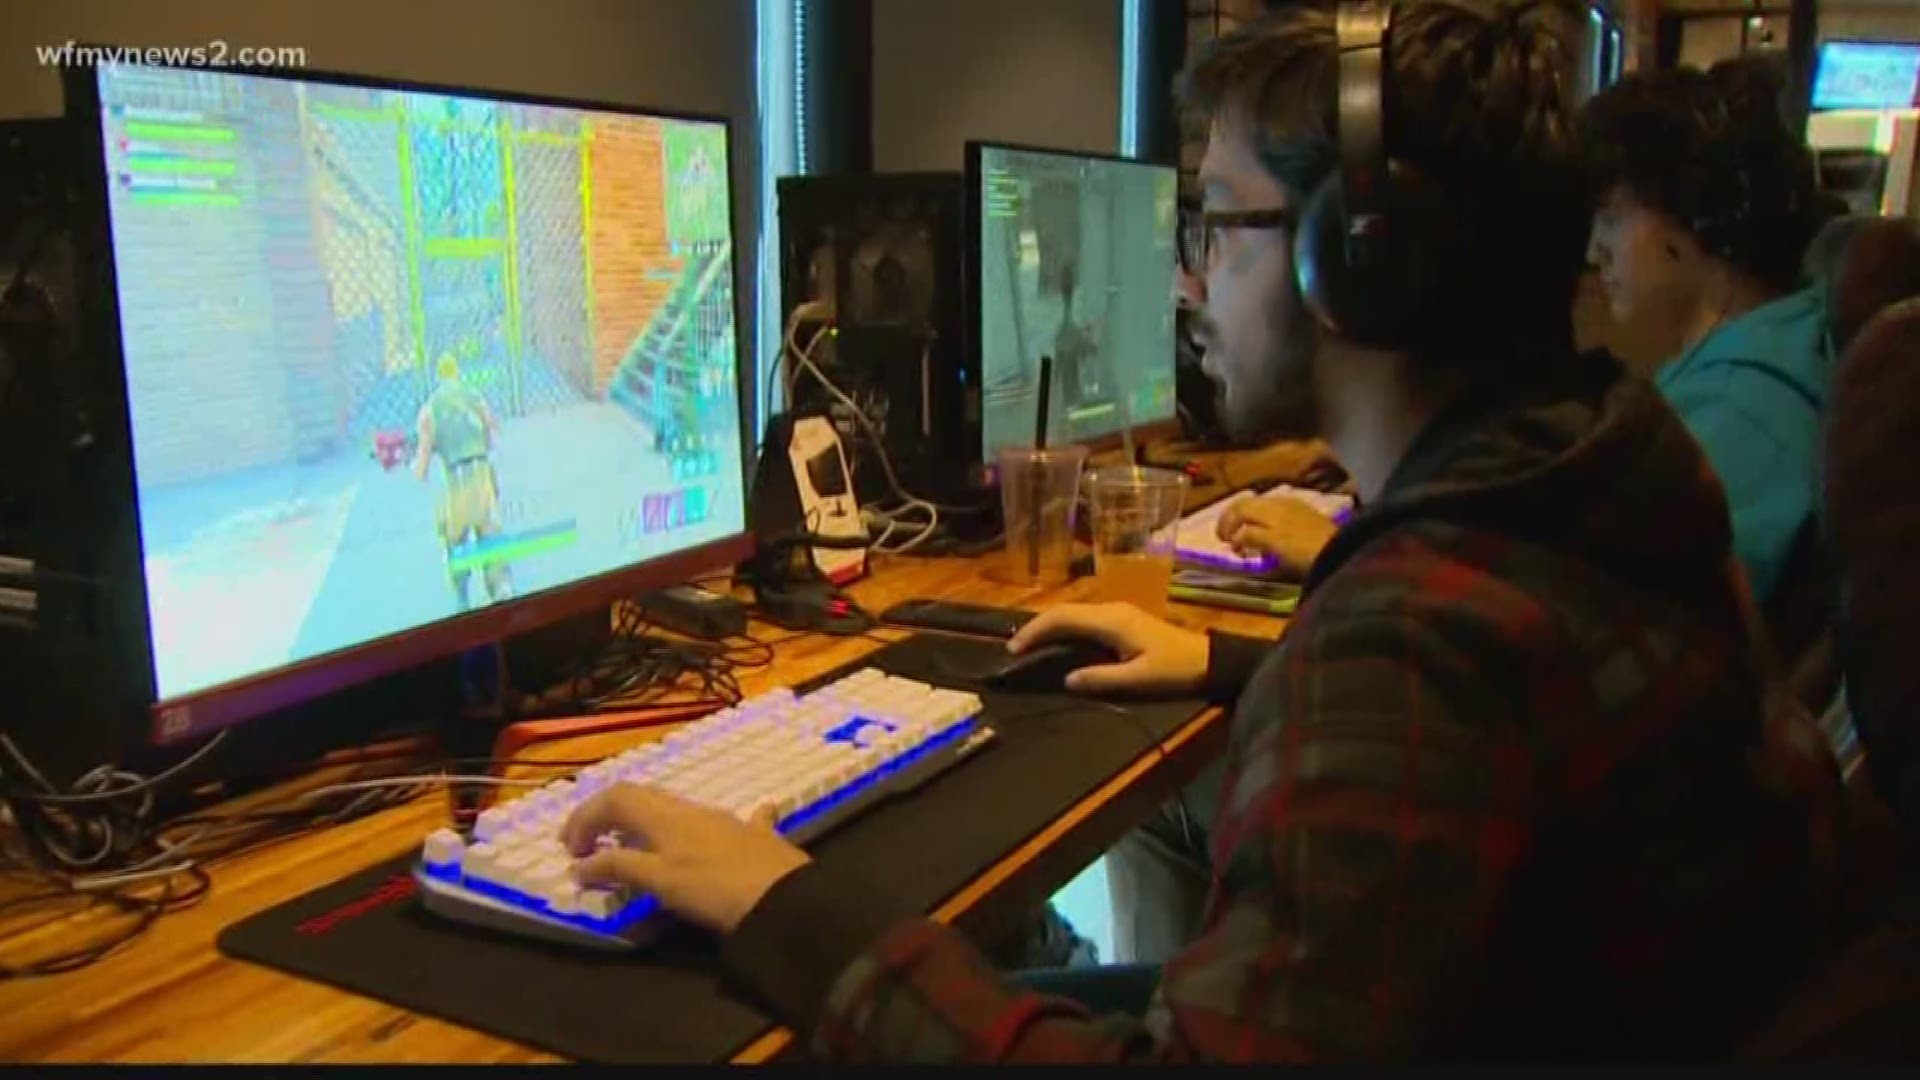 A doctor explains the risks and rewards behind becoming a professional e-gamer.